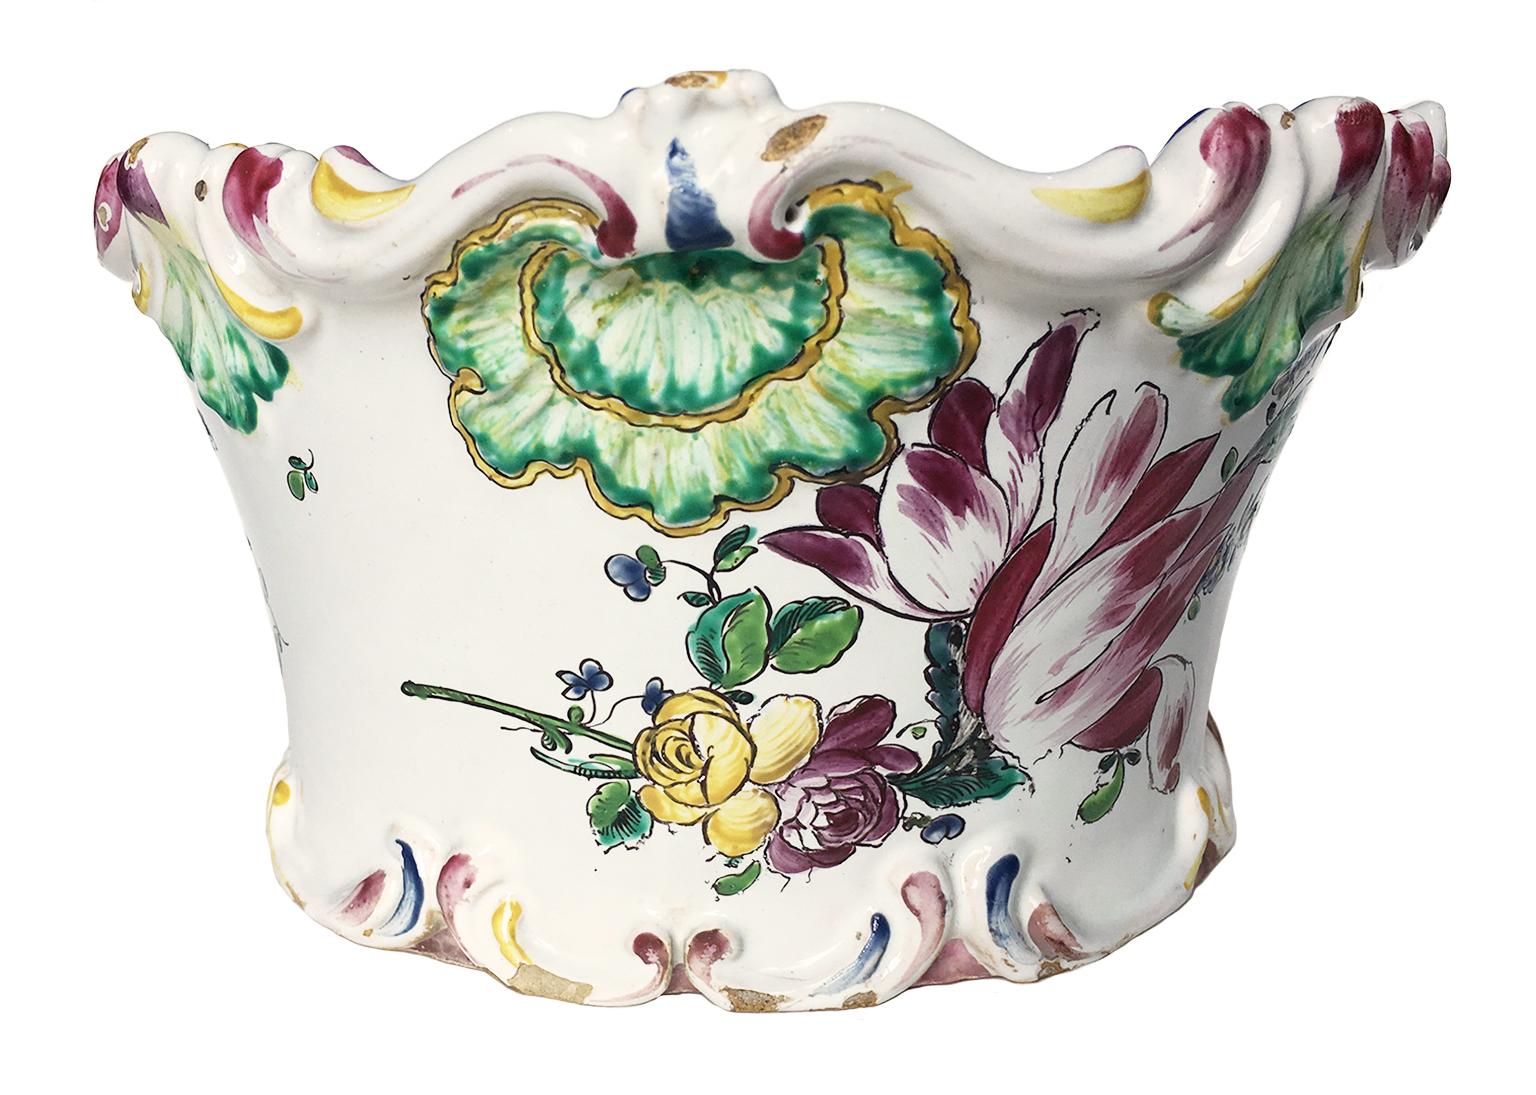 Maiolica flower pot “a mezzaluna” decorated with tulip

Pasquale Rubati Factory
Milan, circa 1770. 
Measures: 4.7 in x 4.7 in x 8.6 in 
12 cm x 12 cm x 22 cm
lb 1.76 (kg 0.8)
State of conservation: intact with slight chipping due to use in relief